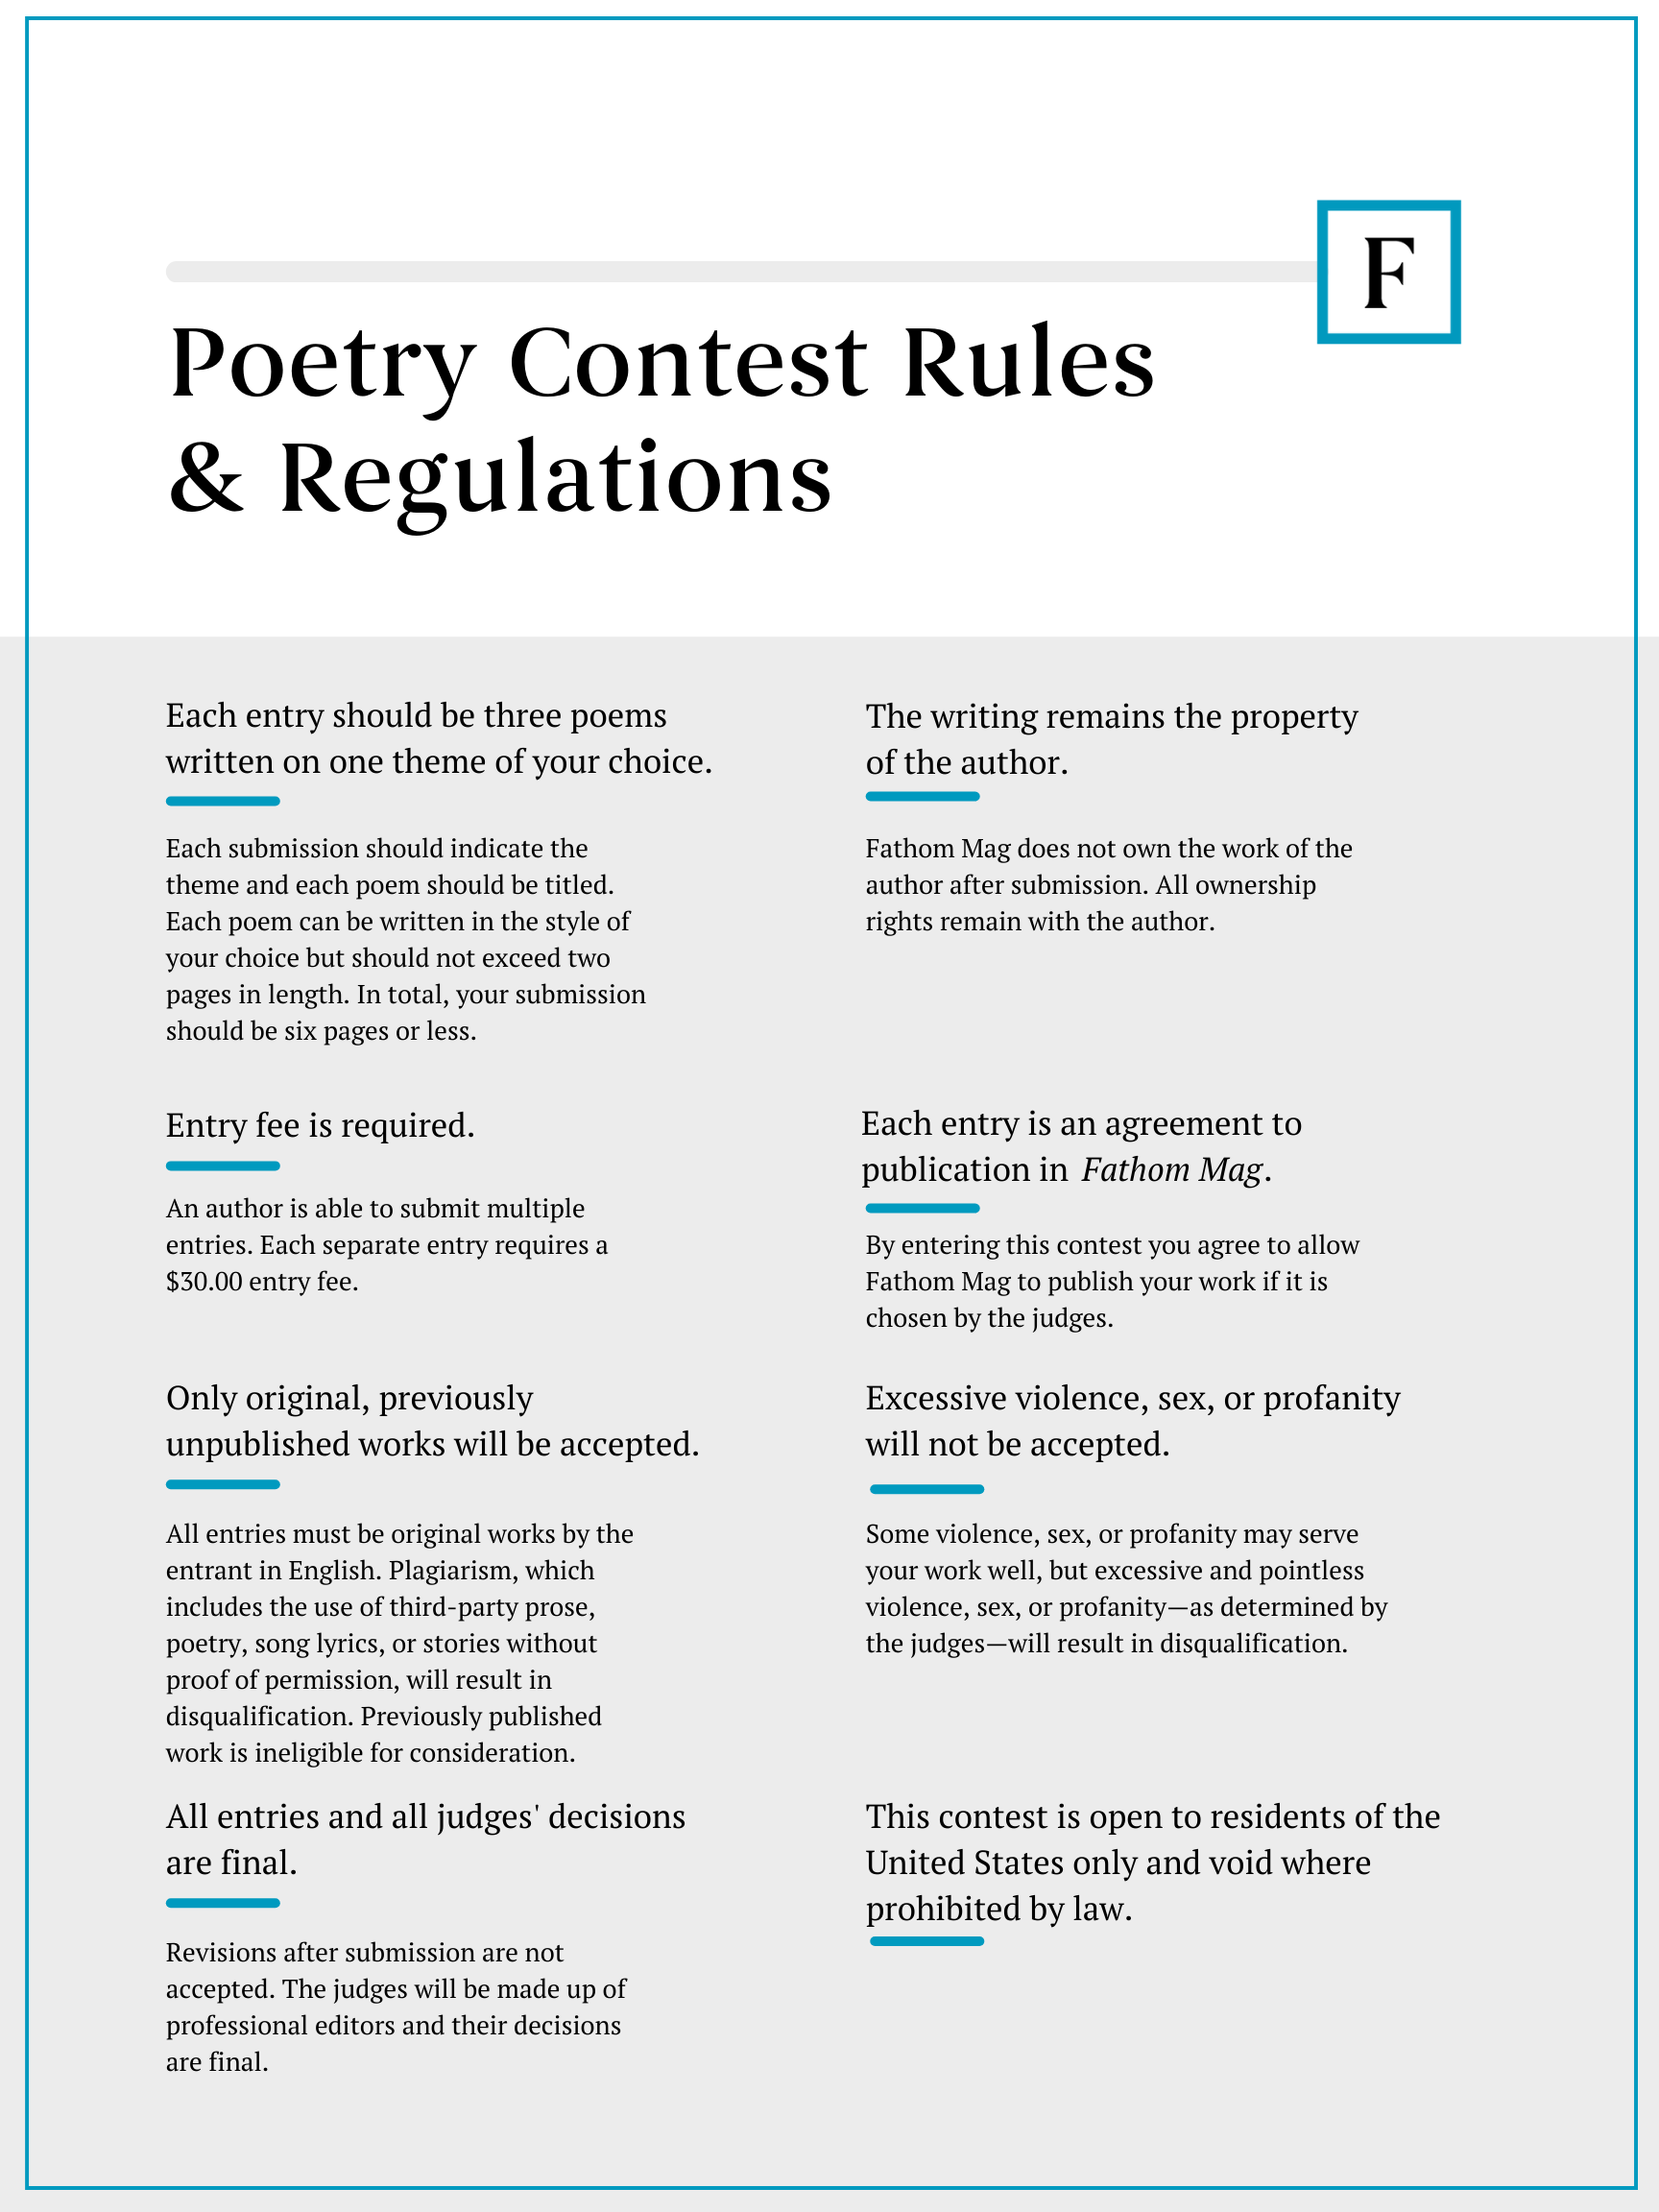 Poetry-Contest-Rules--Regulations-2.png